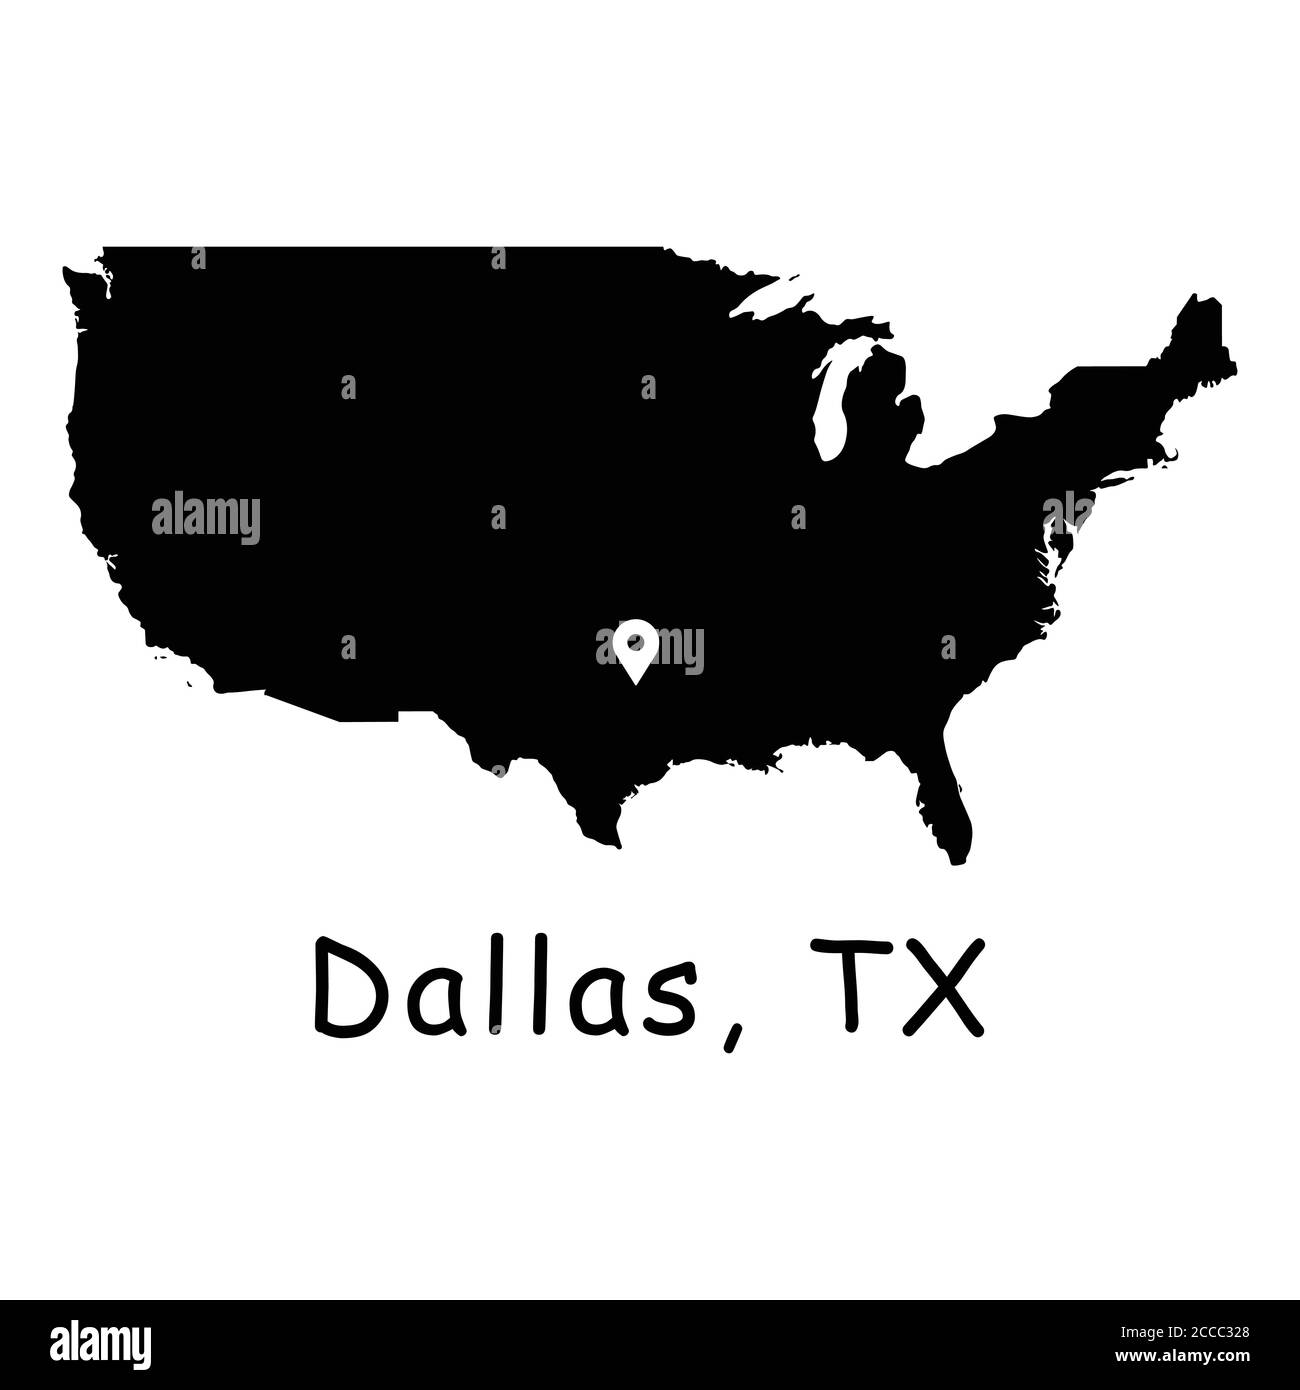 Dallas City Texas on USA Map. Detailed America Country Map with Location Pin on Dallas TX. Black silhouette vector maps isolated on white background. Stock Vector